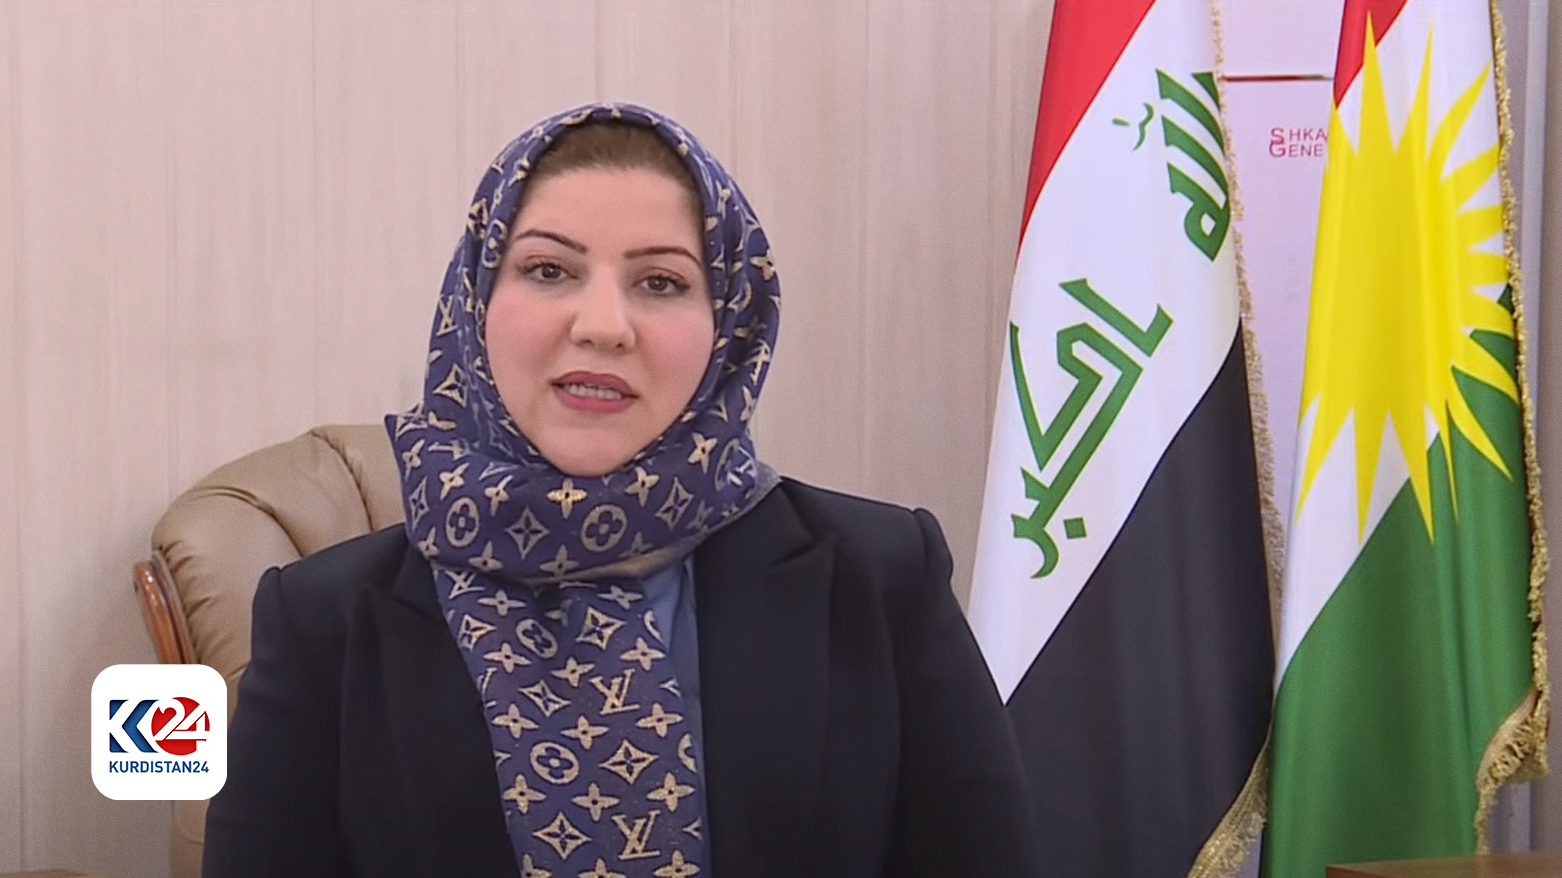 Sarwa Rasul, Director General of the Coordination and Crisis Center at the Ministry of Interior. (Photo: Kurdistan 24)